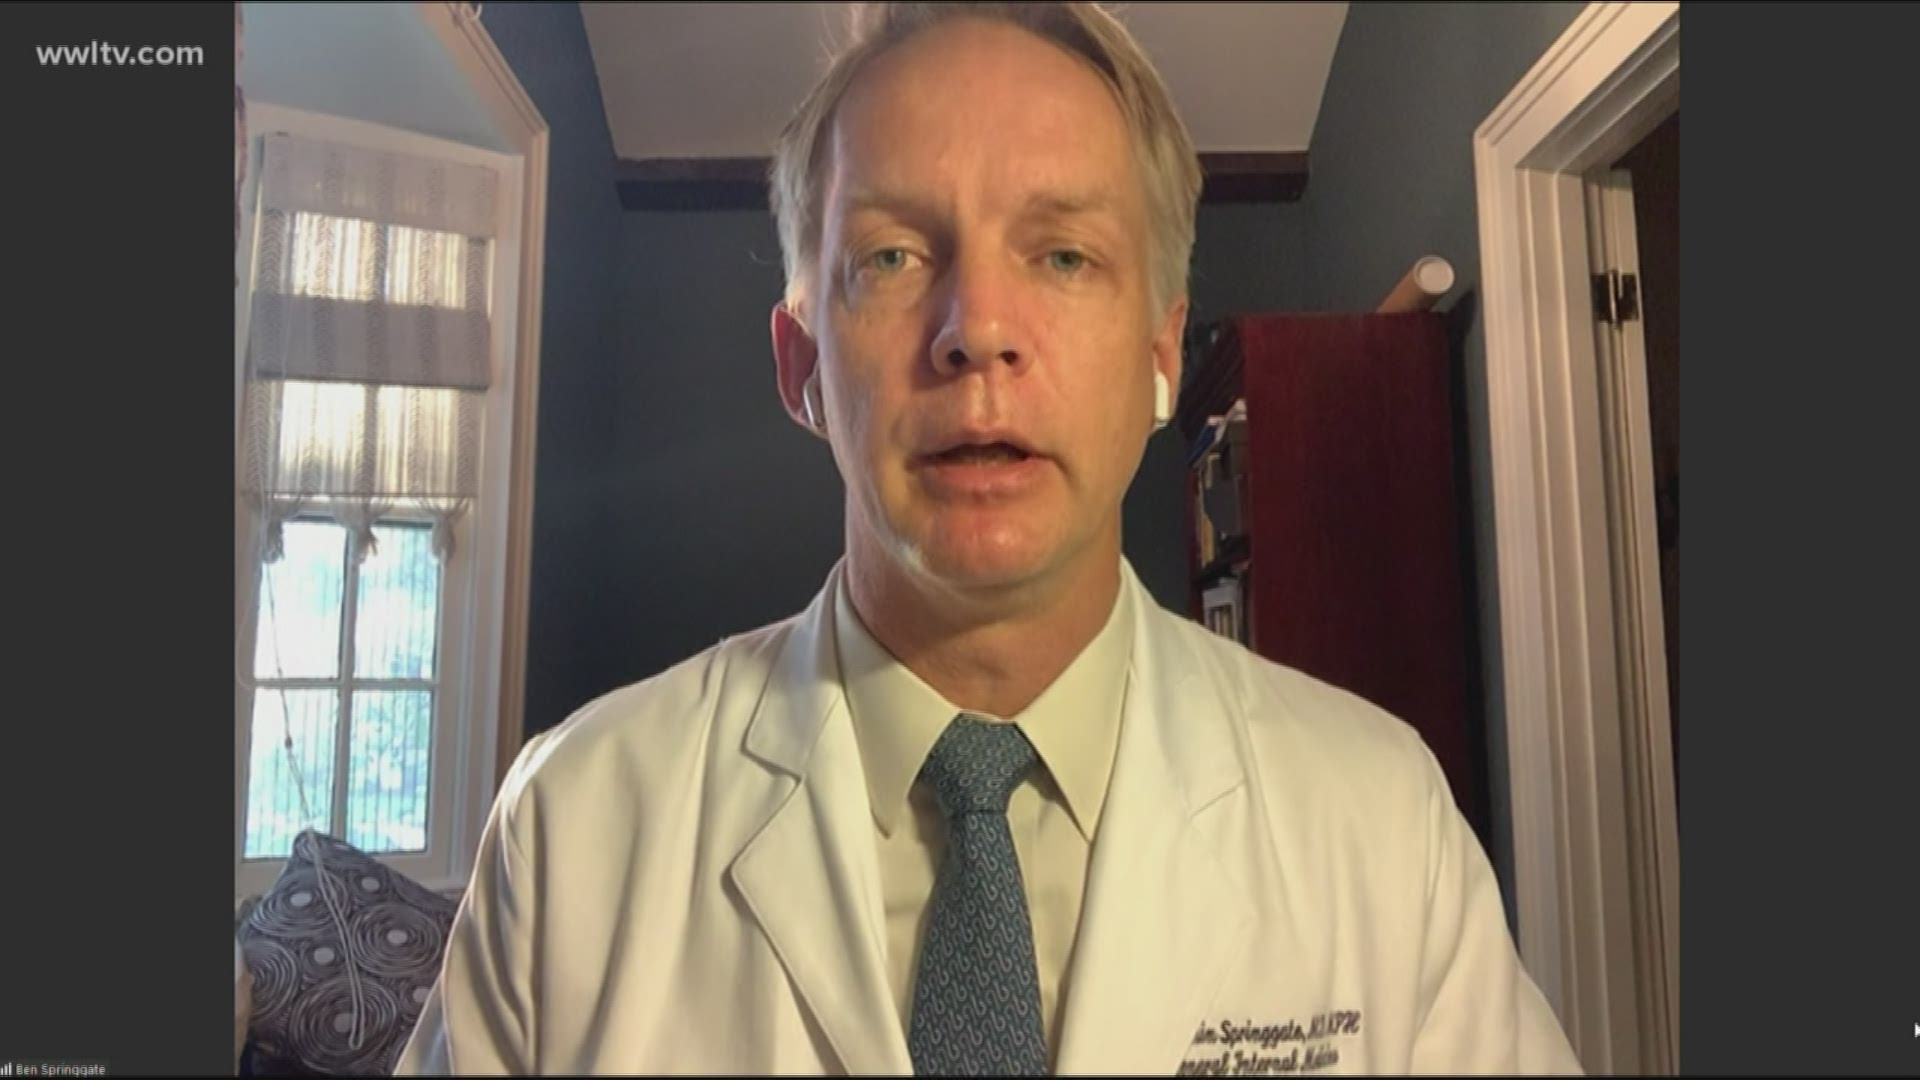 Dr. Ben Springgate explains why there is growing concern from medical professionals about how slow testing is in the state, plus the lack of medical equipment.